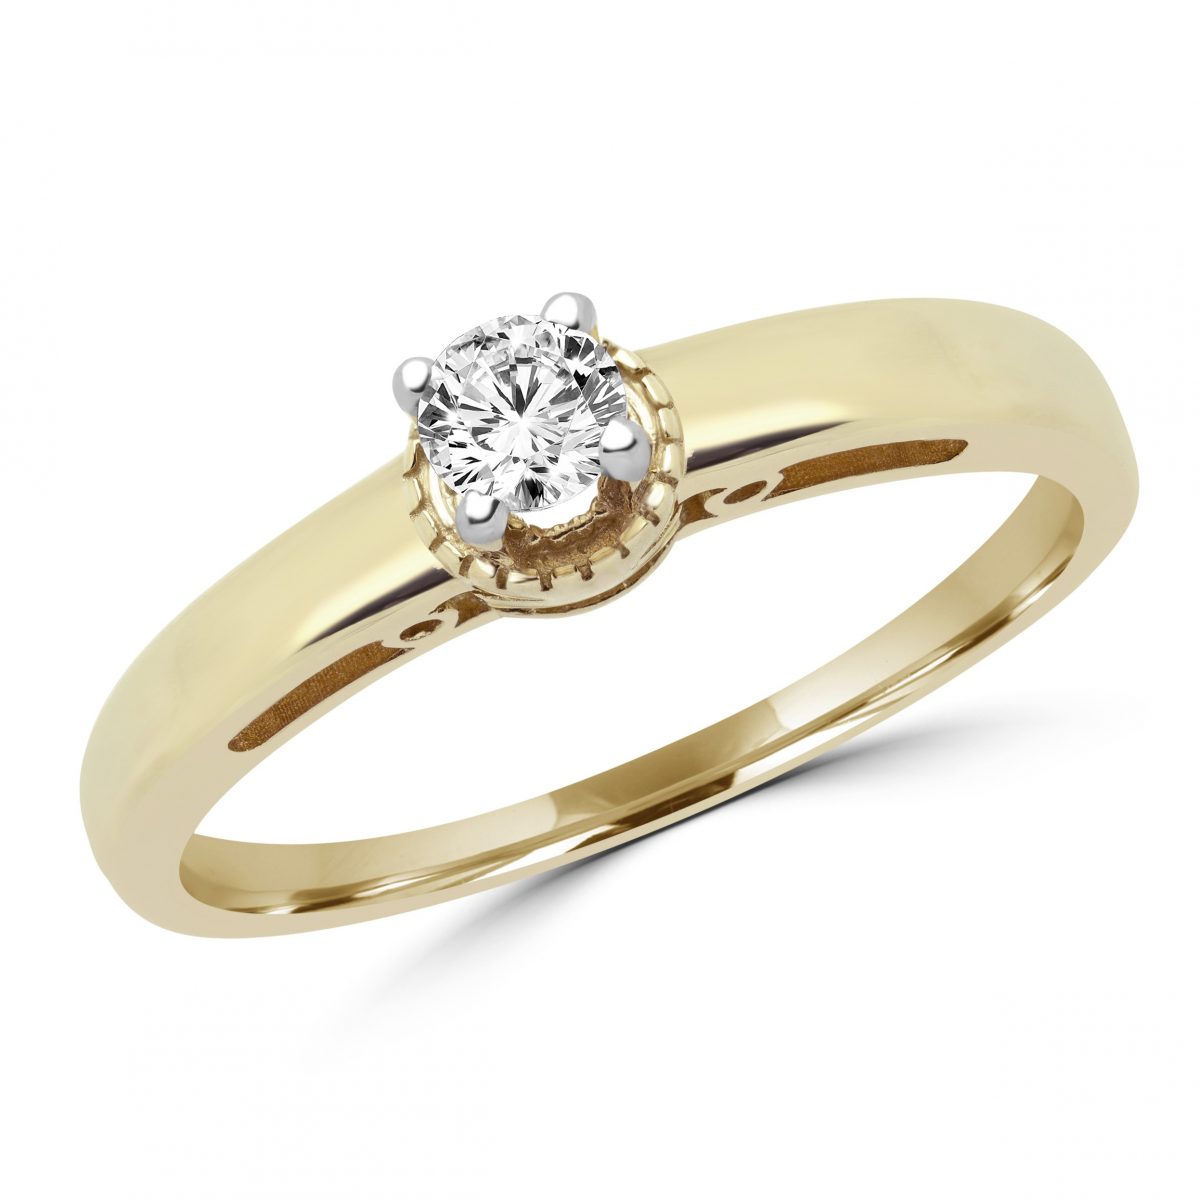 Sparkling solitaire engagement ring in 10k yellow gold